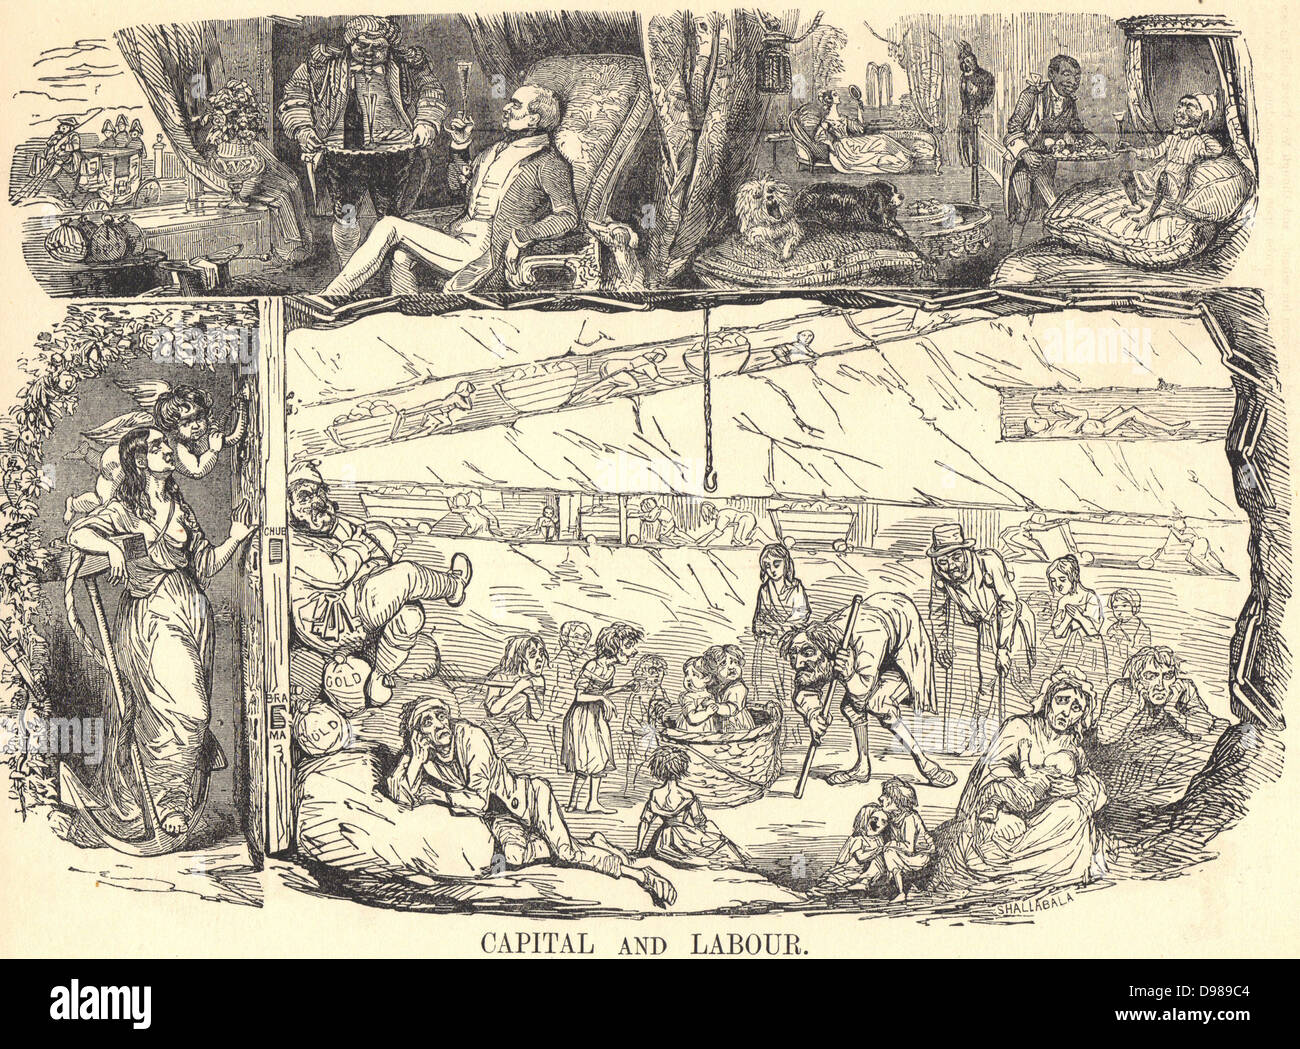 Capital and Labour': Cartoon from 'Punch', London, 1843, in response to Richard Horne's report of child employment. In coal mines 'labourers are obliged to go on all-fours like dogs'. The labouring poor are locked away in misery, toiling to produce the wealth that enabled 'upper classes' to live in luxury. Stock Photo